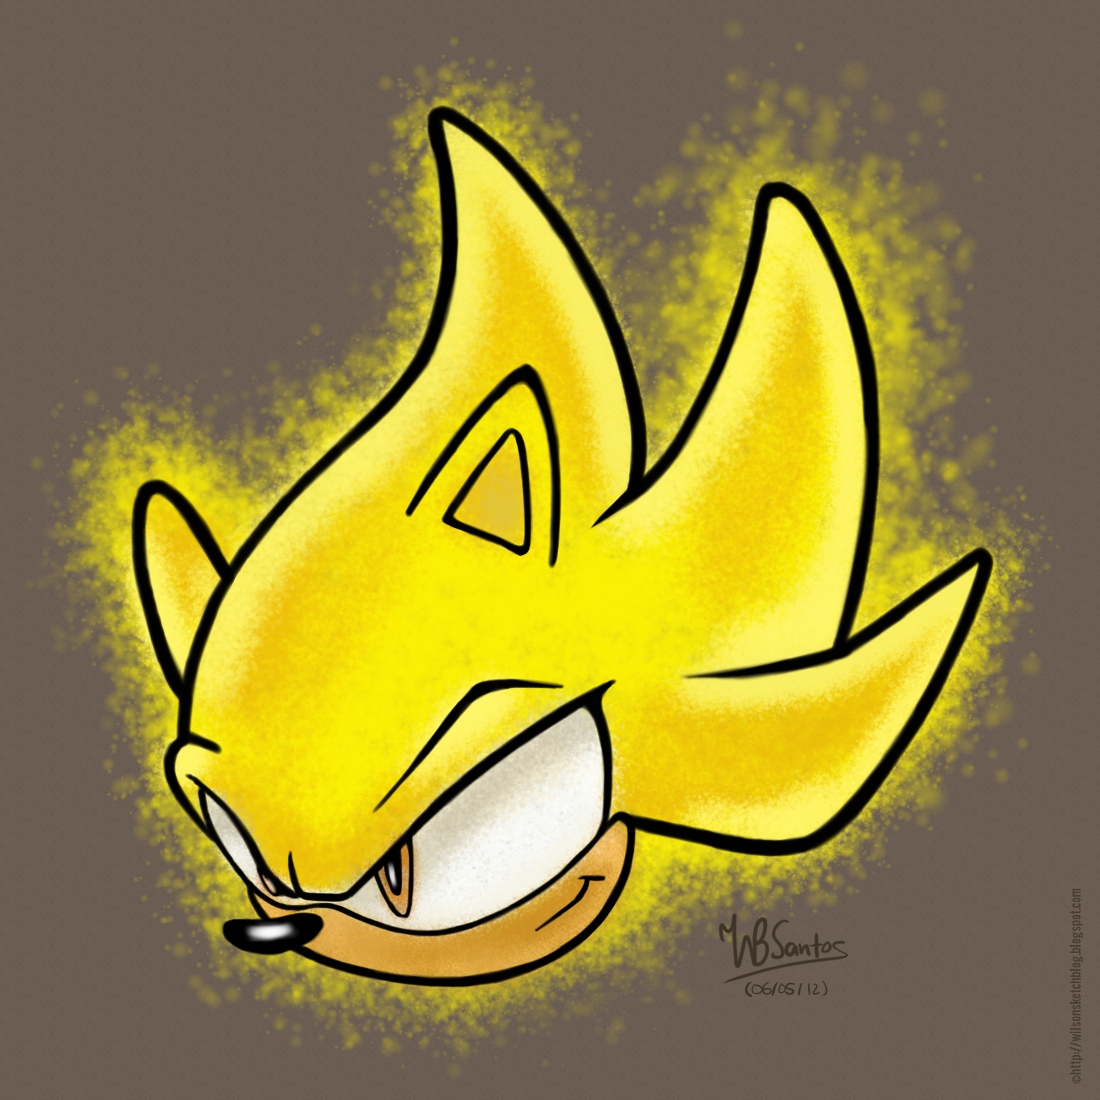 Super Sonic Drawing at GetDrawings Free download